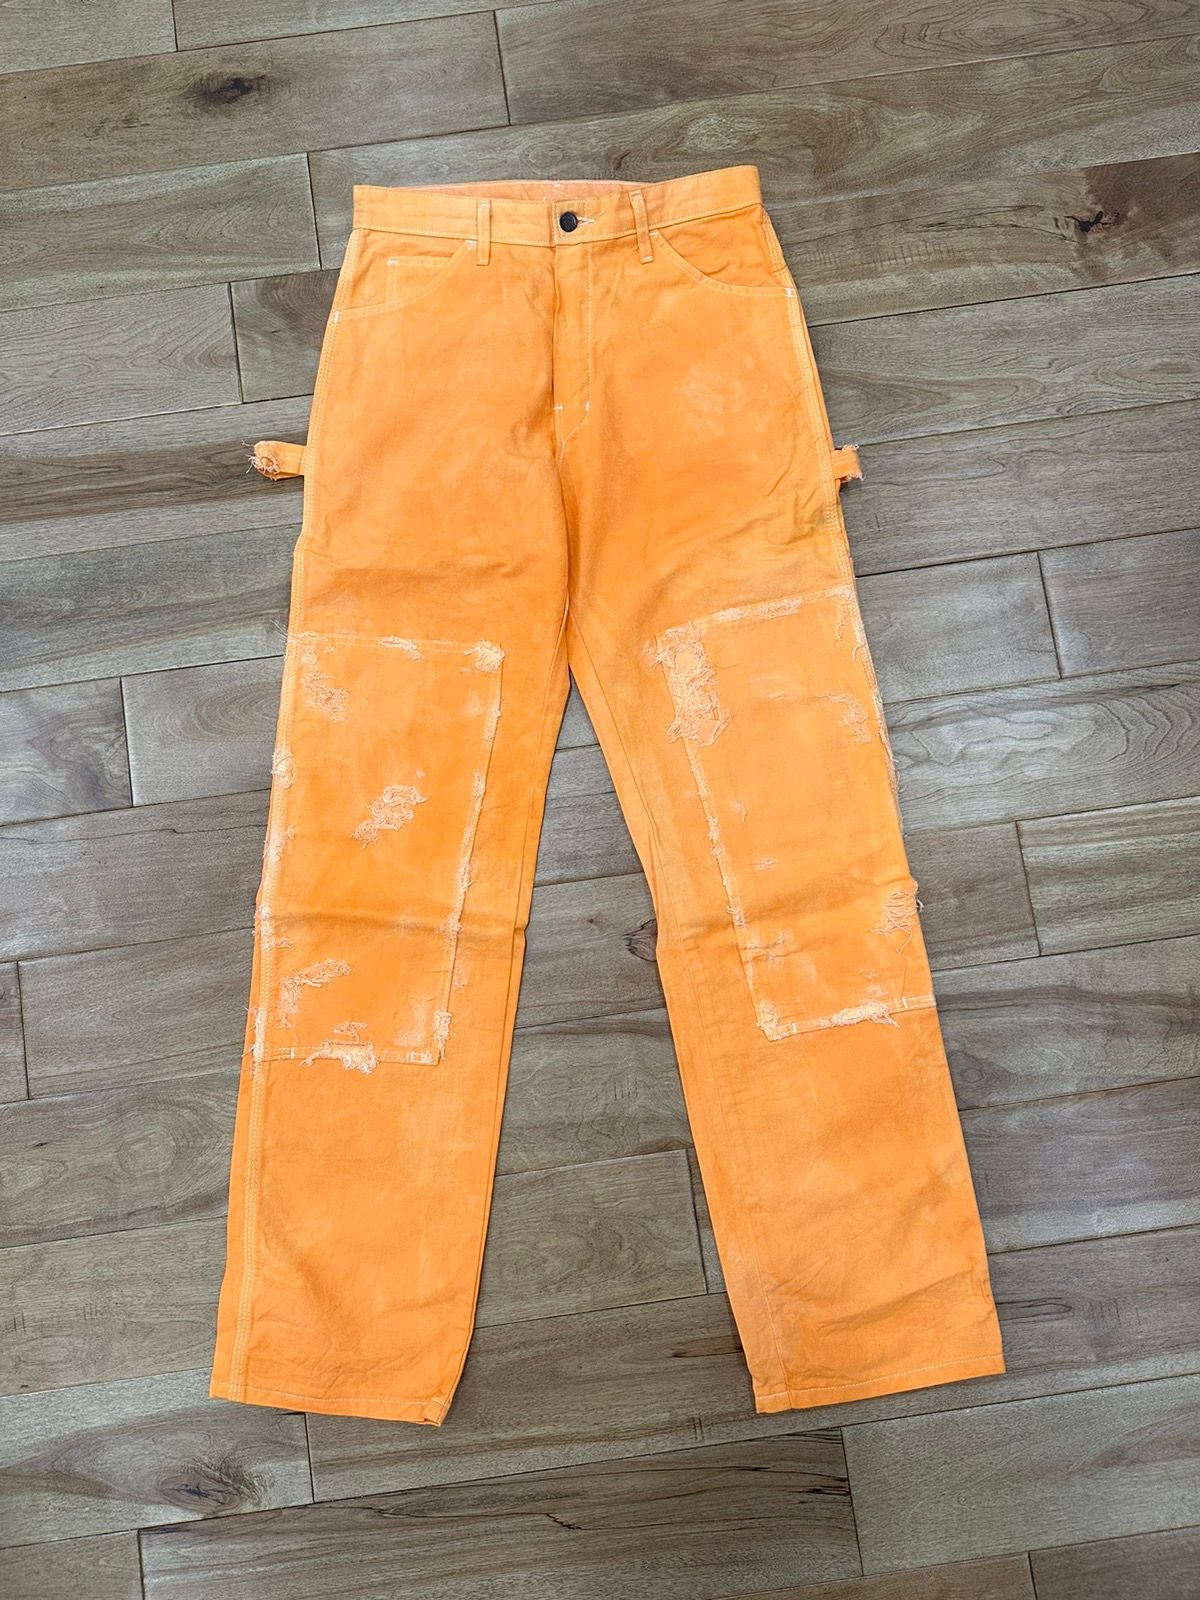 Custom Hand dyed and distressed Dickies Double Knee Pants Size US 30 / EU 46 - 1 Preview